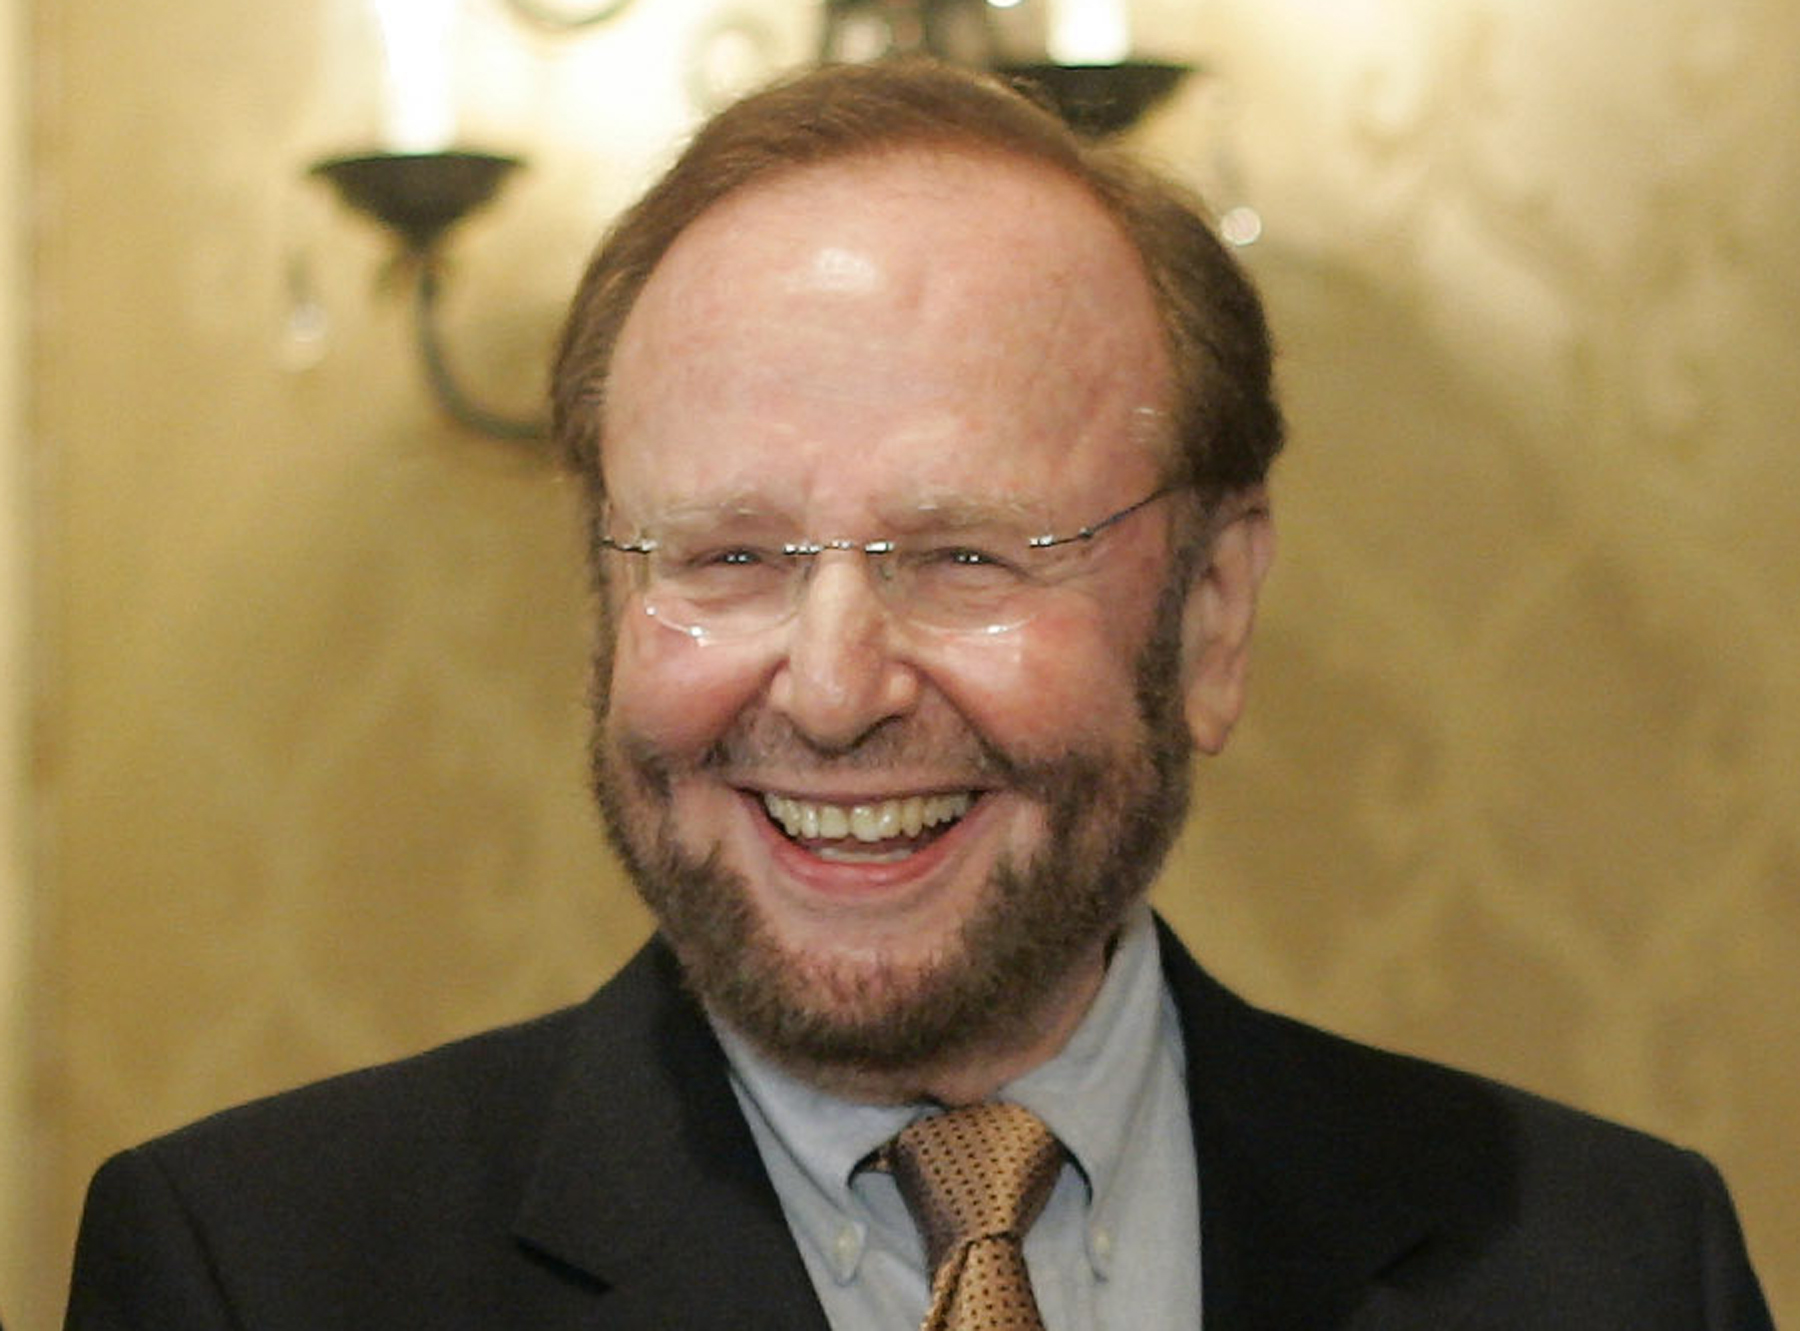 This May 25, 2005 file photo shows Tampa Bay Buccaneers team owner and president Malcolm Glazer at the NFL's Spring Meetings at the Ritz-Carlton Hotel in Washington. (J. Scott Applewhite—AP)